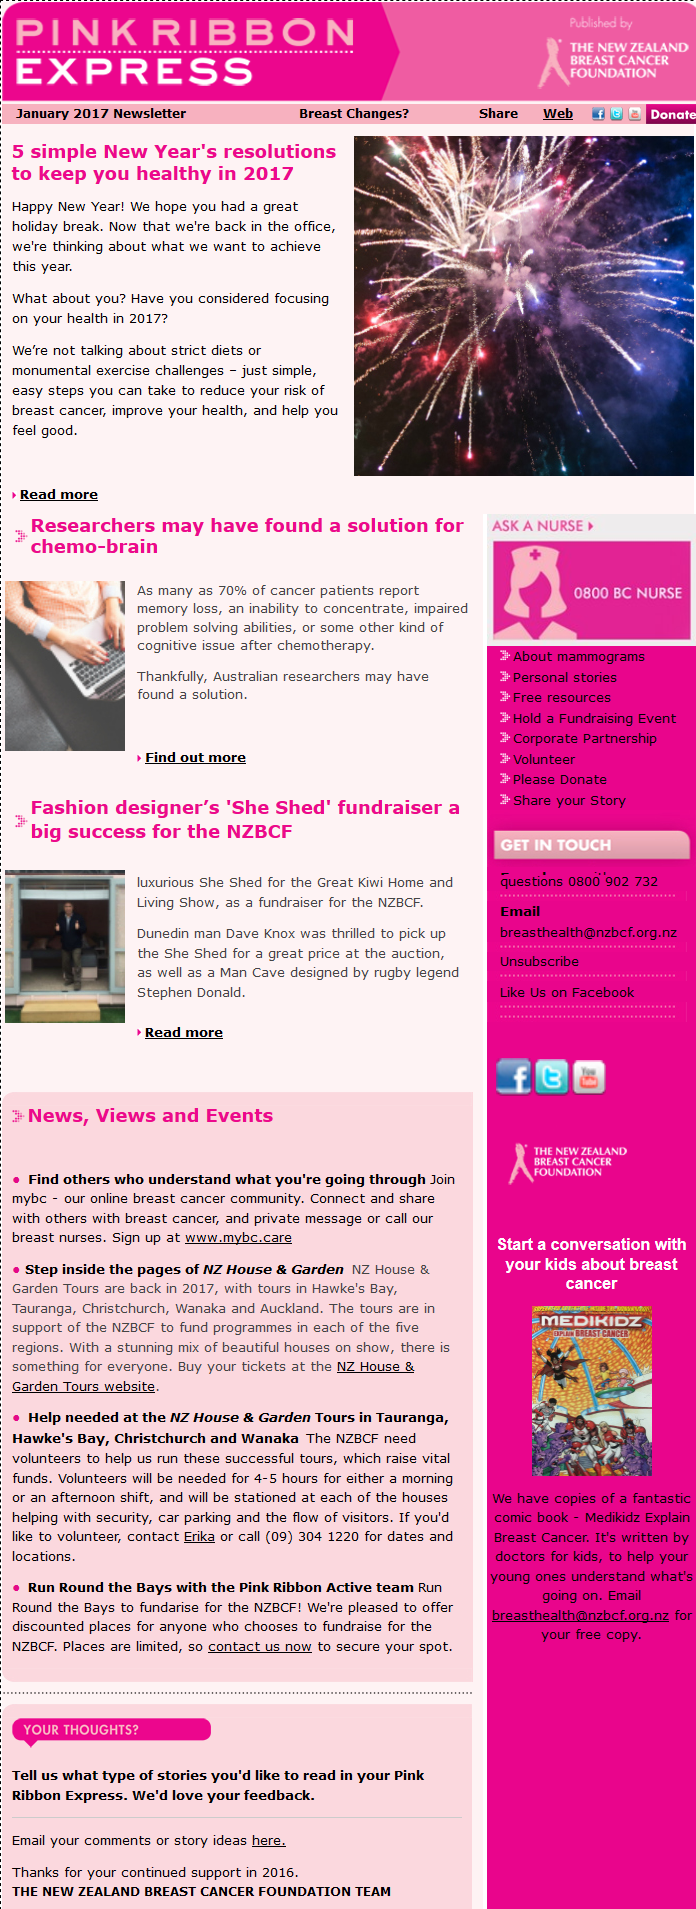 New Zealand Breast Cancer Foundation News Newsletters Pink Ribbon Express January 2017.png